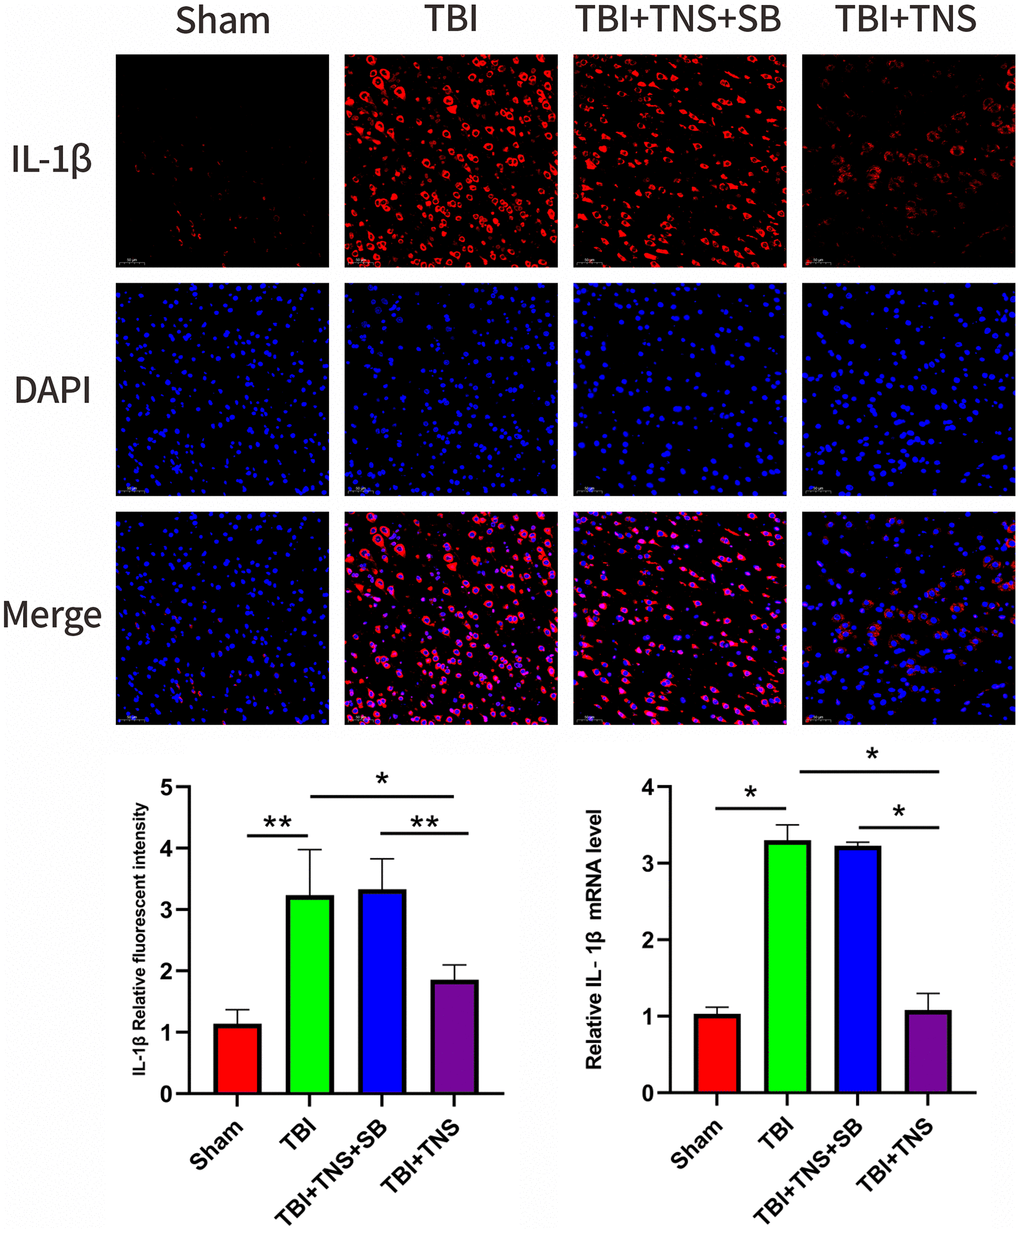 Trigeminal nerve electrical stimulation (TNS) decreases interleukin (IL)-1β levels after traumatic brain injury (TBI) via orexin-A (OX-A)/orexin receptor 1 (OX1R). Representative immunofluorescence staining and relative mRNA levels of IL-1β. Results are expressed as mean ± standard deviation (SD; *P **P ***P 